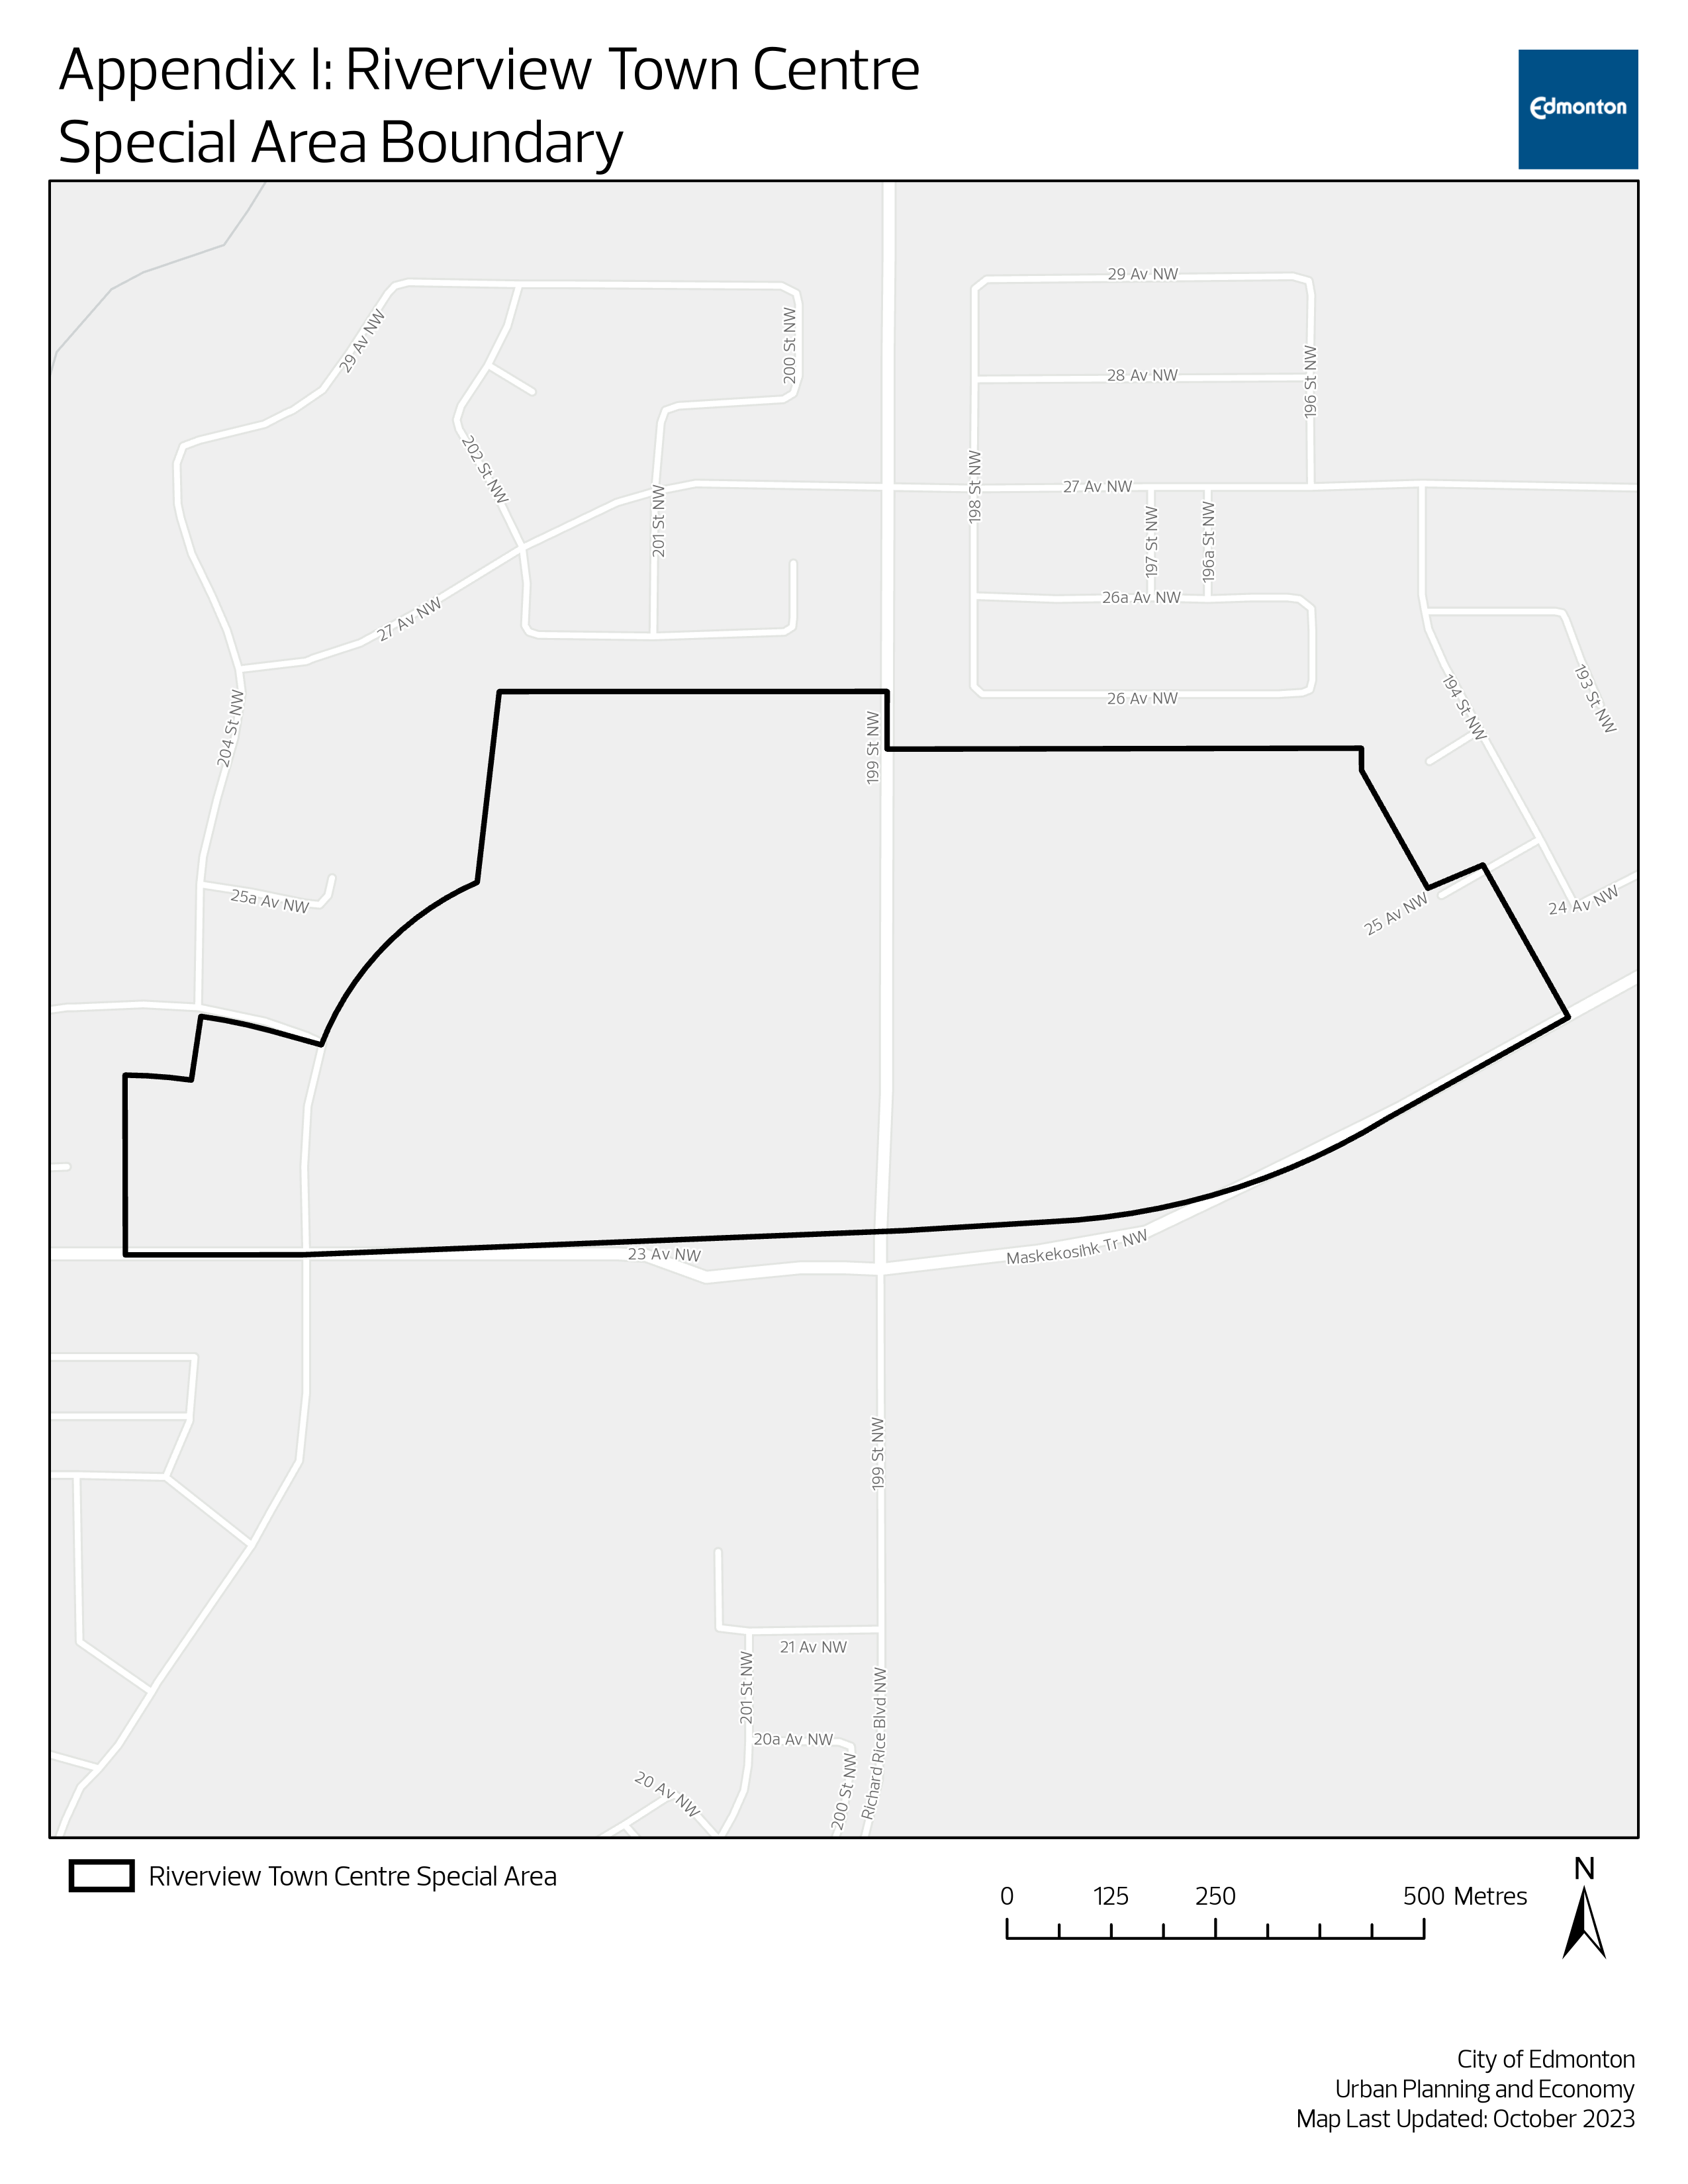 Riverview Town Centre Special Area boundary map